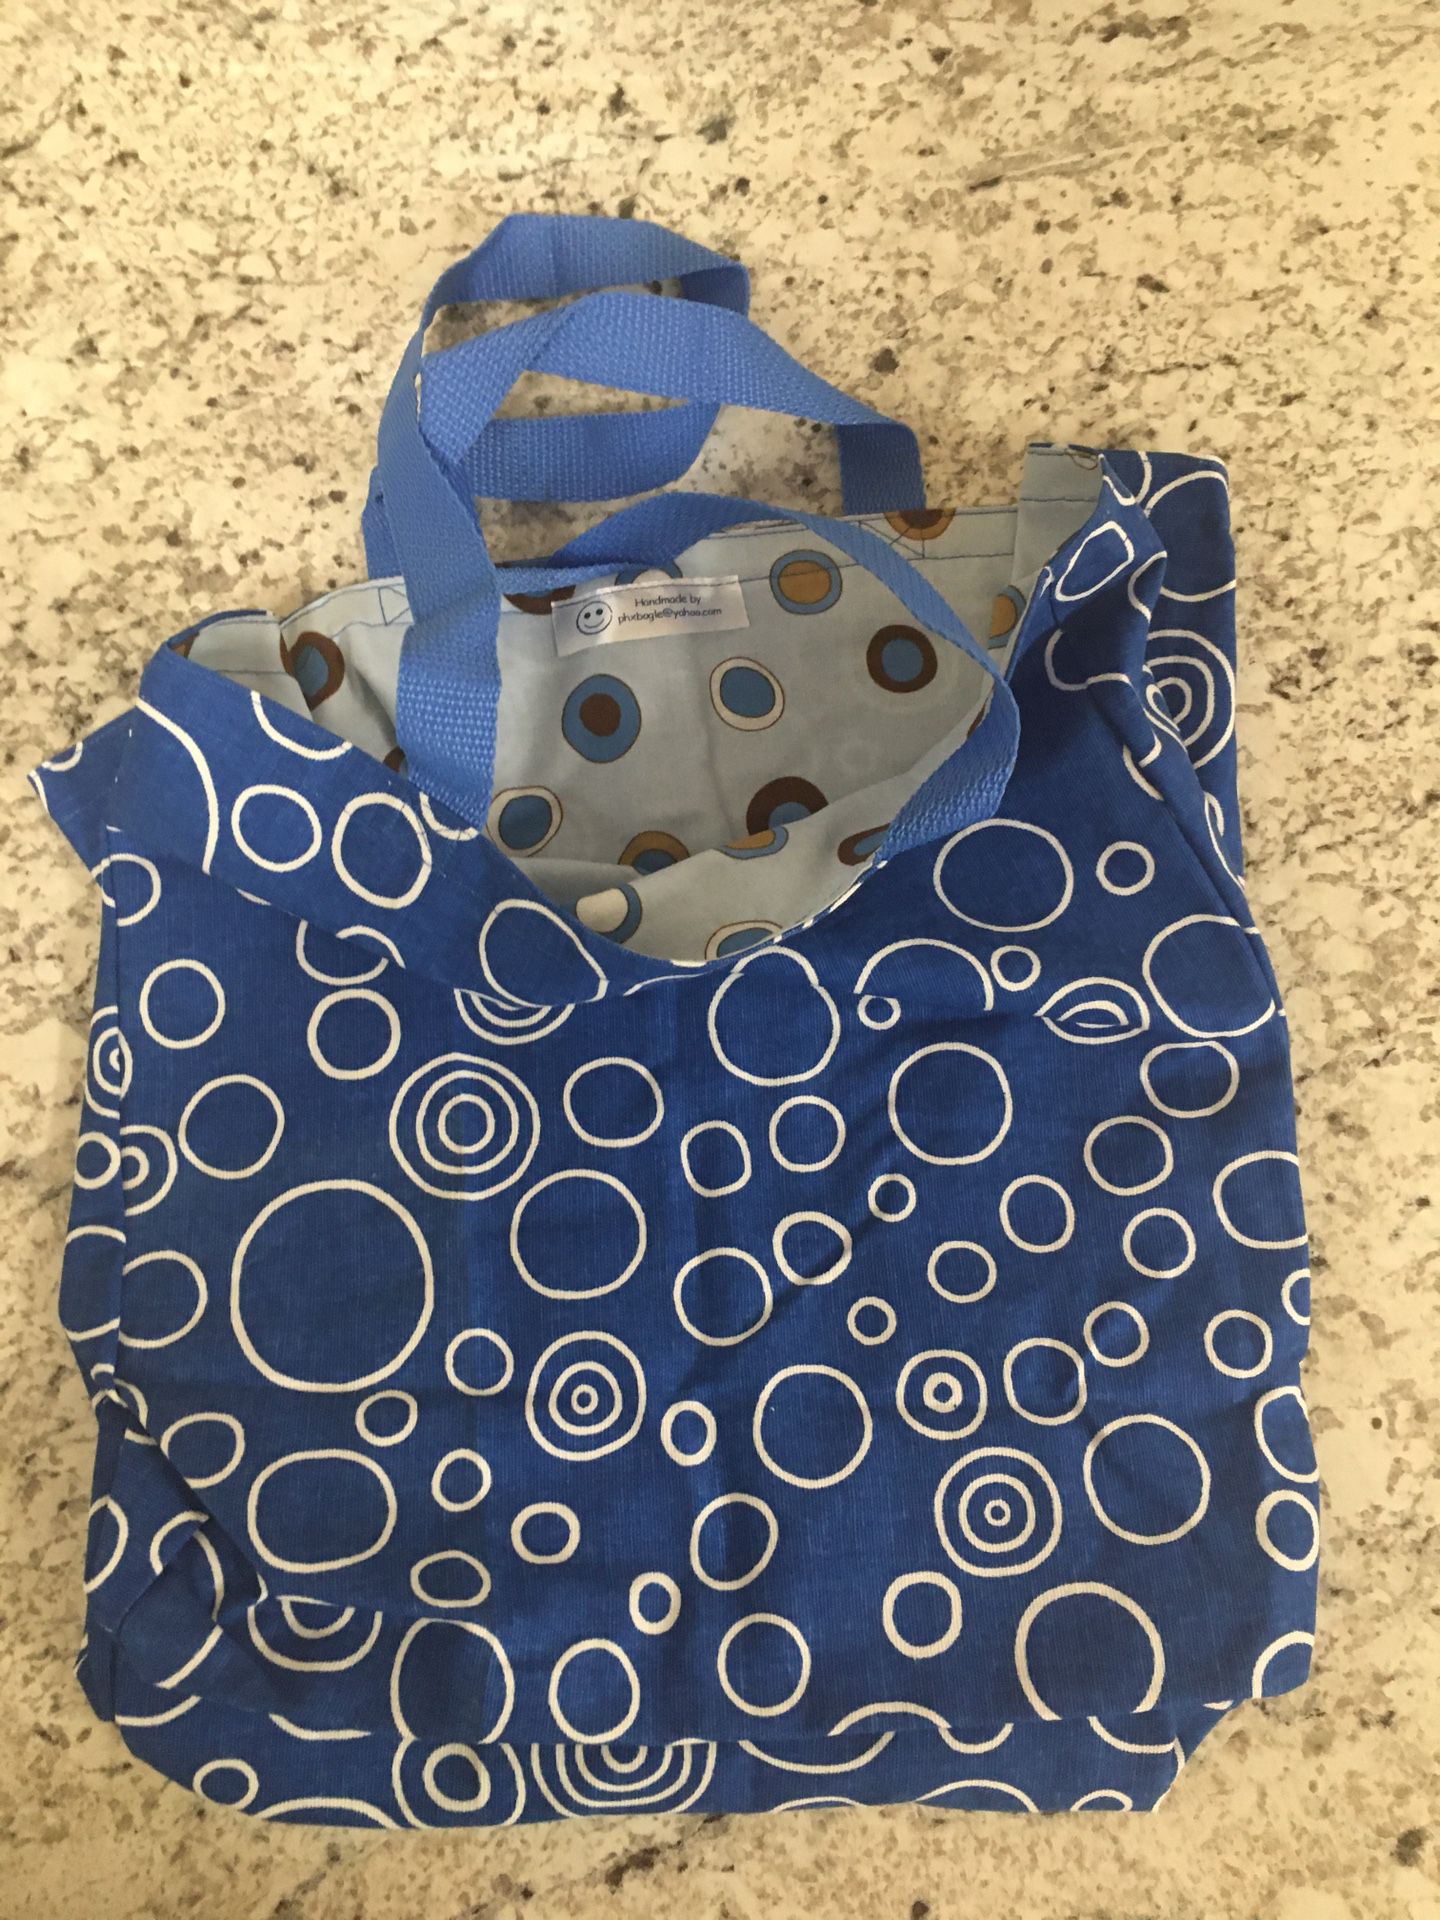 Totes with lining and handles. Handmade! Good for groceries or books etc.